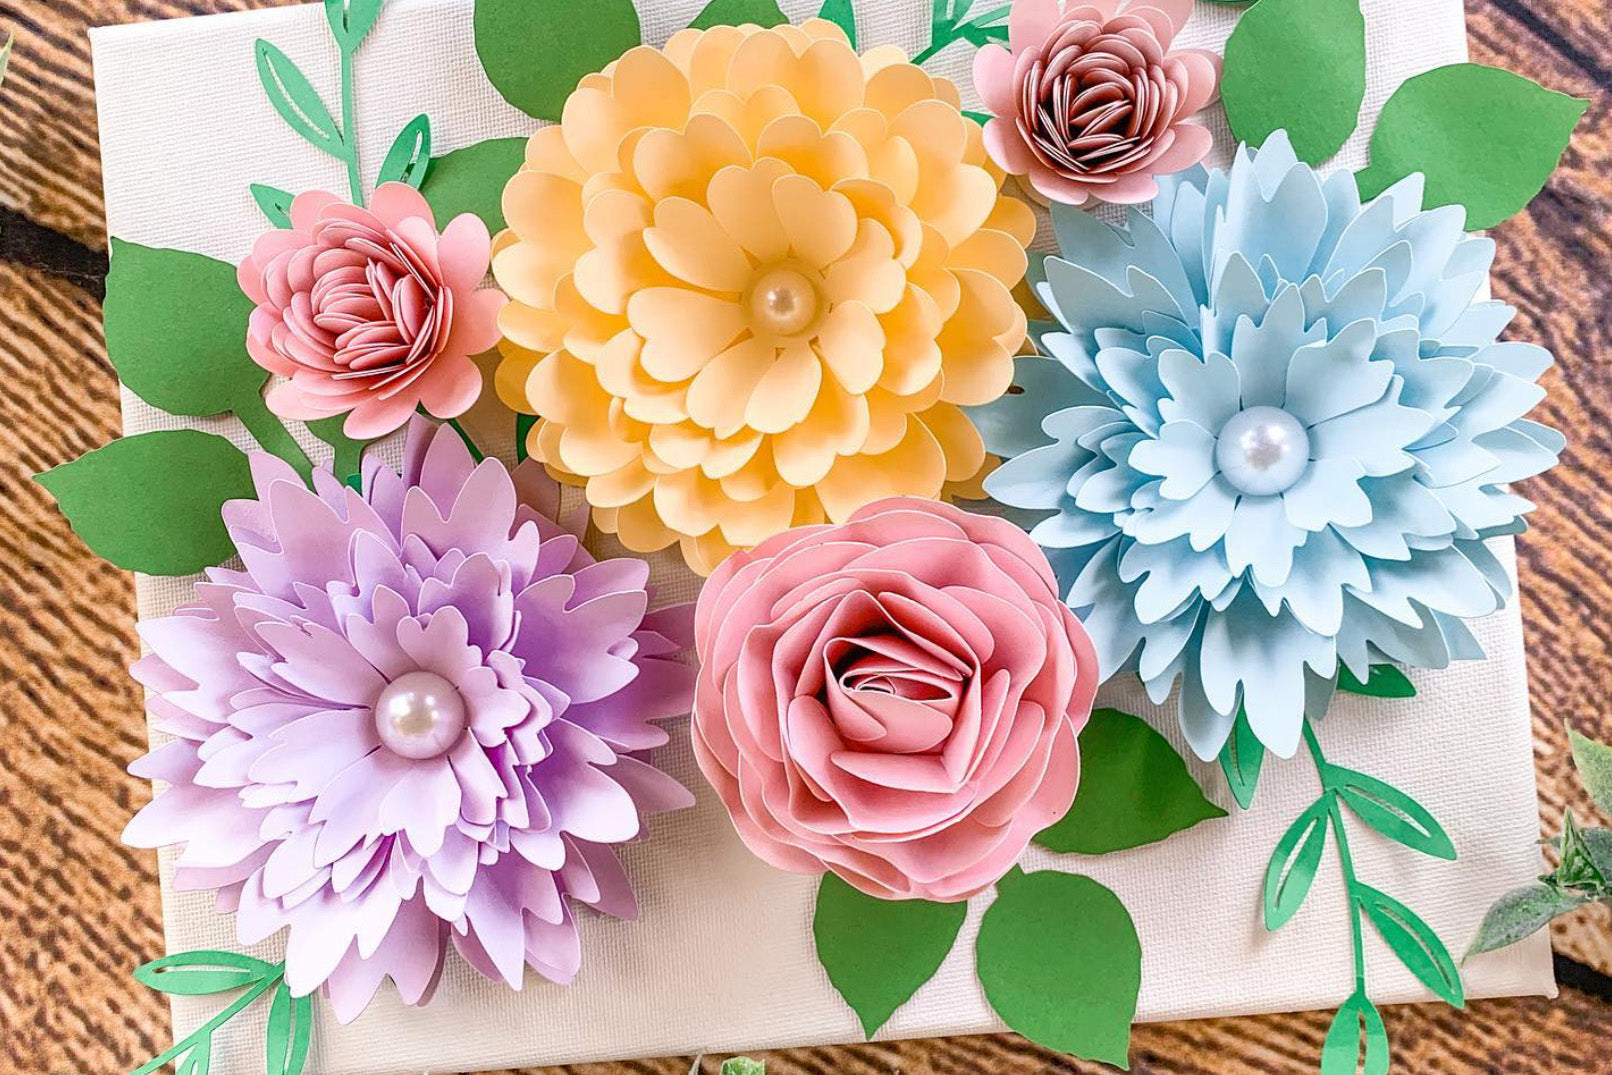 Easy Way To Make Realistic Paper Rose - Paper Flower - Paper Craft - DIY  Flower 